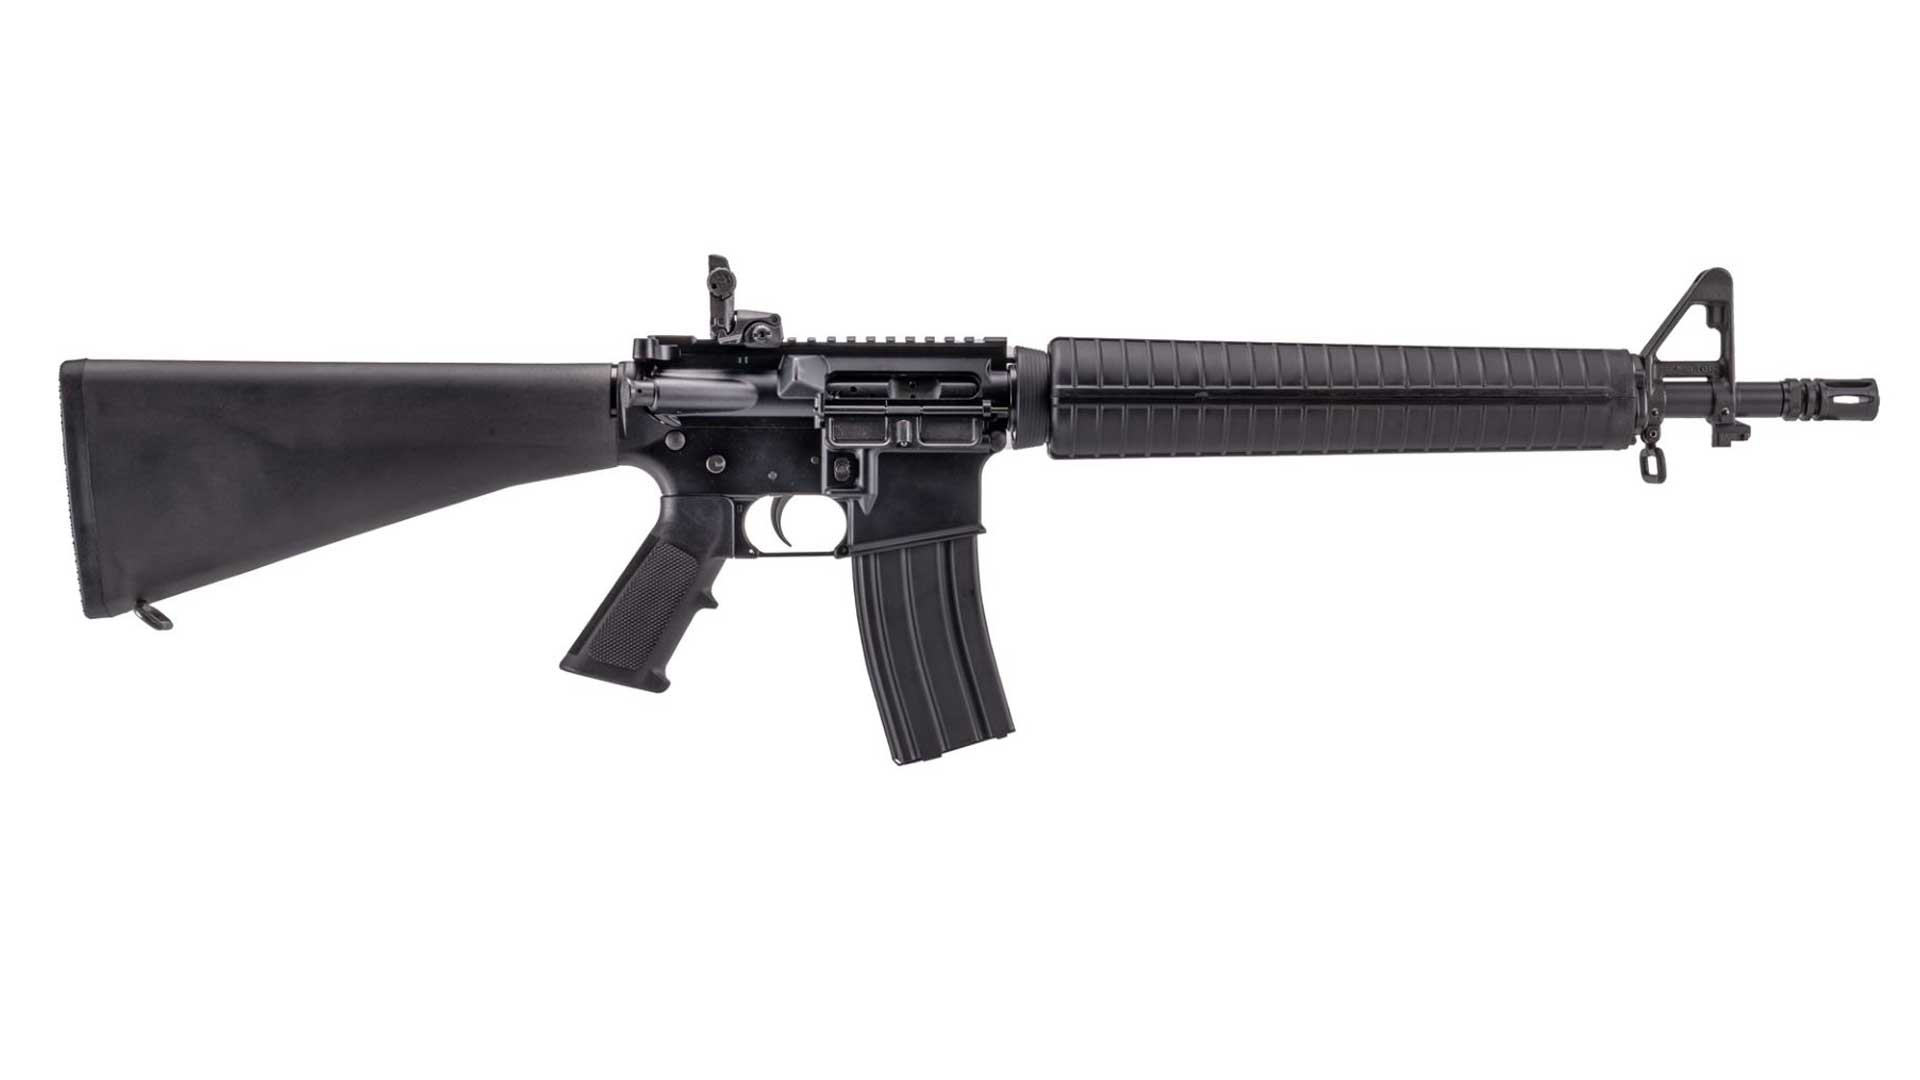 First Look: Anderson Mfg. Dissipator Rifle | An Official Journal Of The NRA